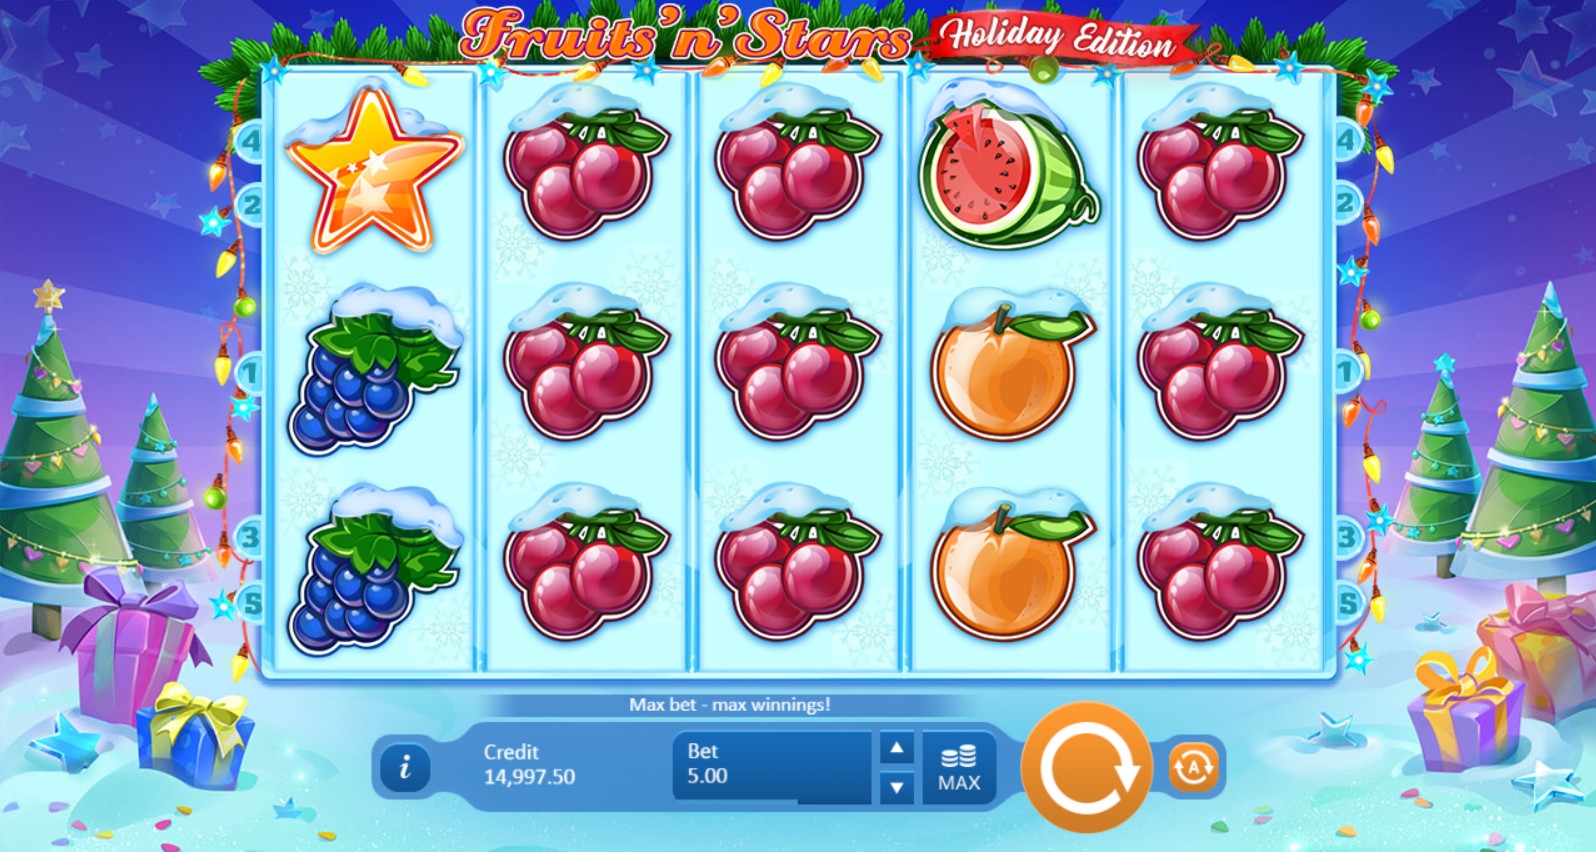 Fruits ‘n’ Stars: Holiday Edition (Fruits ‘n’ Stars: Holiday Edition) from category Slots